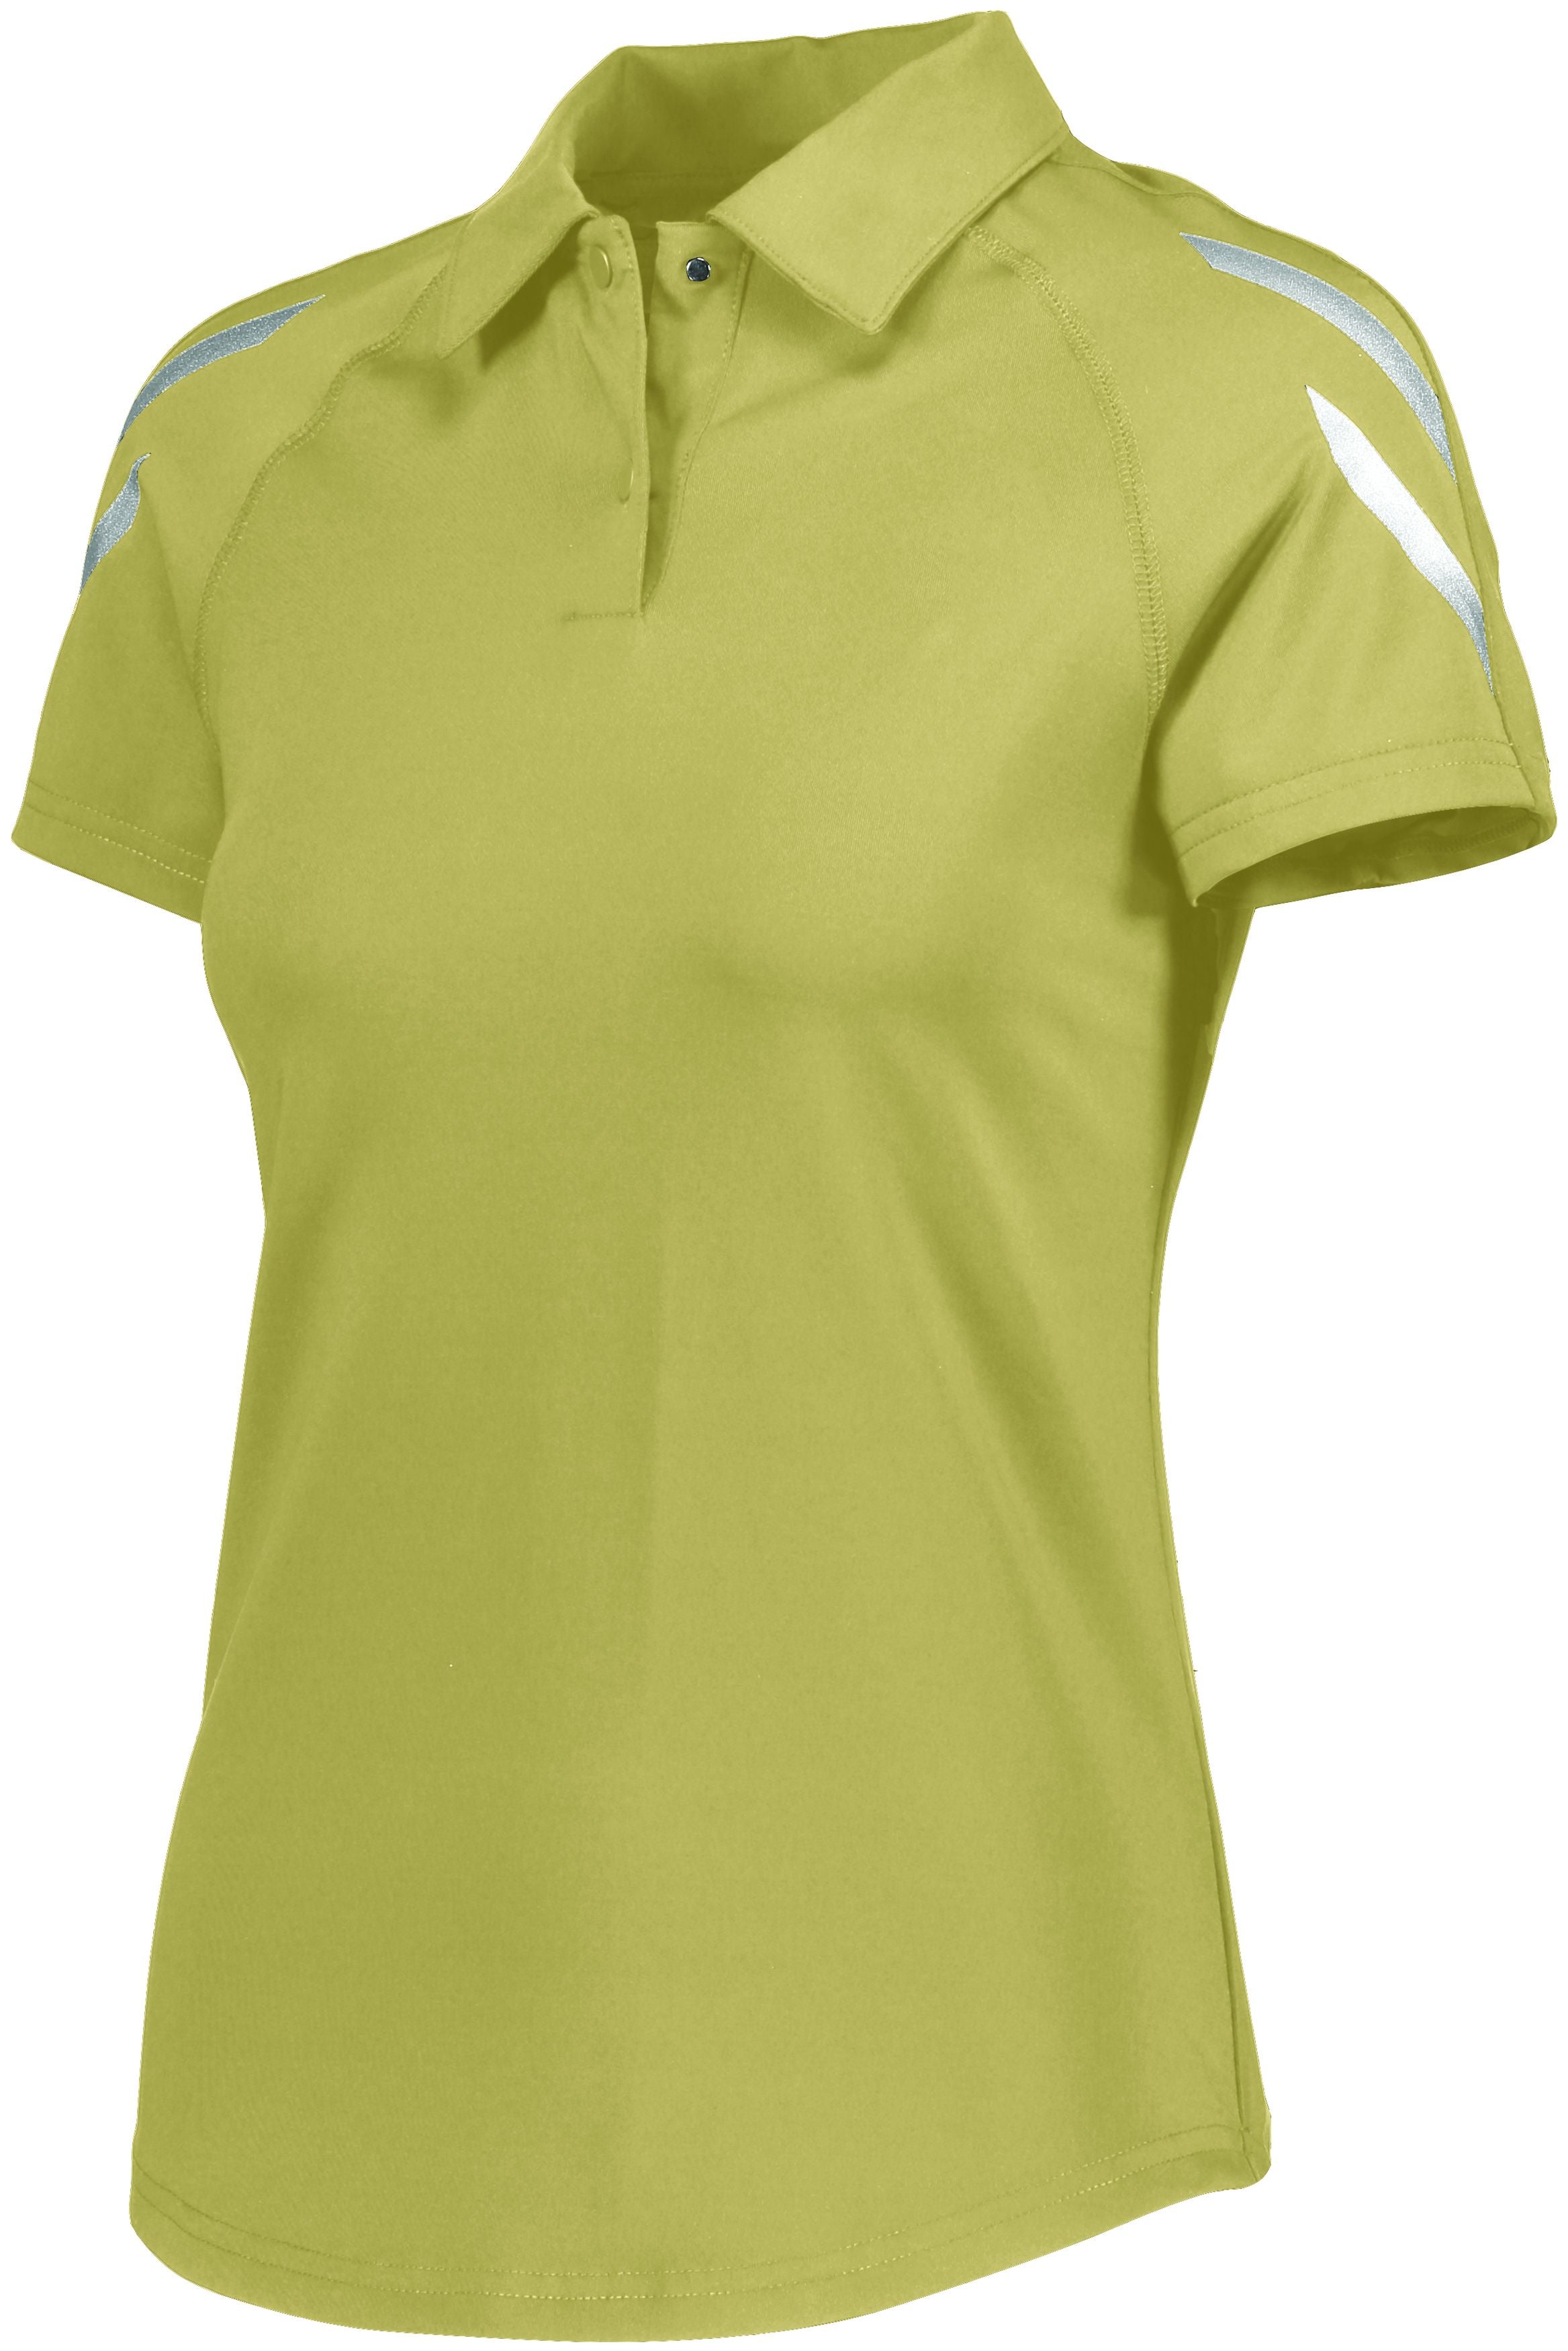 Holloway Ladies Flux Polo in Vegas Gold  -Part of the Ladies, Ladies-Polo, Polos, Holloway, Shirts, Flux-Collection, Corporate-Collection product lines at KanaleyCreations.com